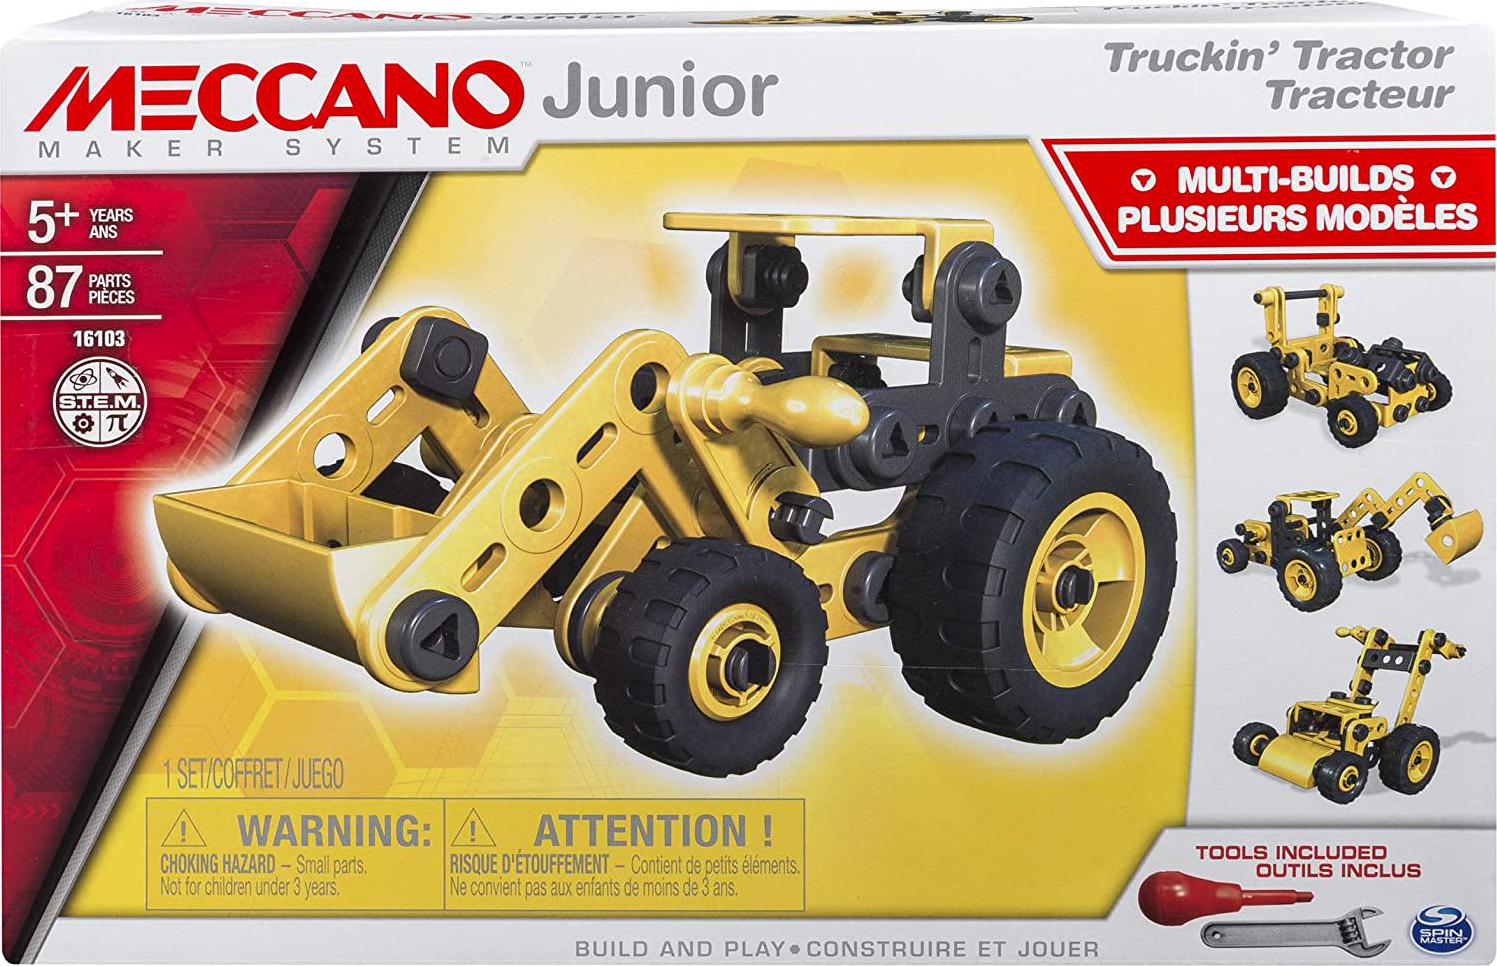 MECCANO, Meccano by Erector Junior, Truckin' Tractor, 4 Model Building Set, 87 Piece, Stem Building Construction Education Toy, for Ages 5+